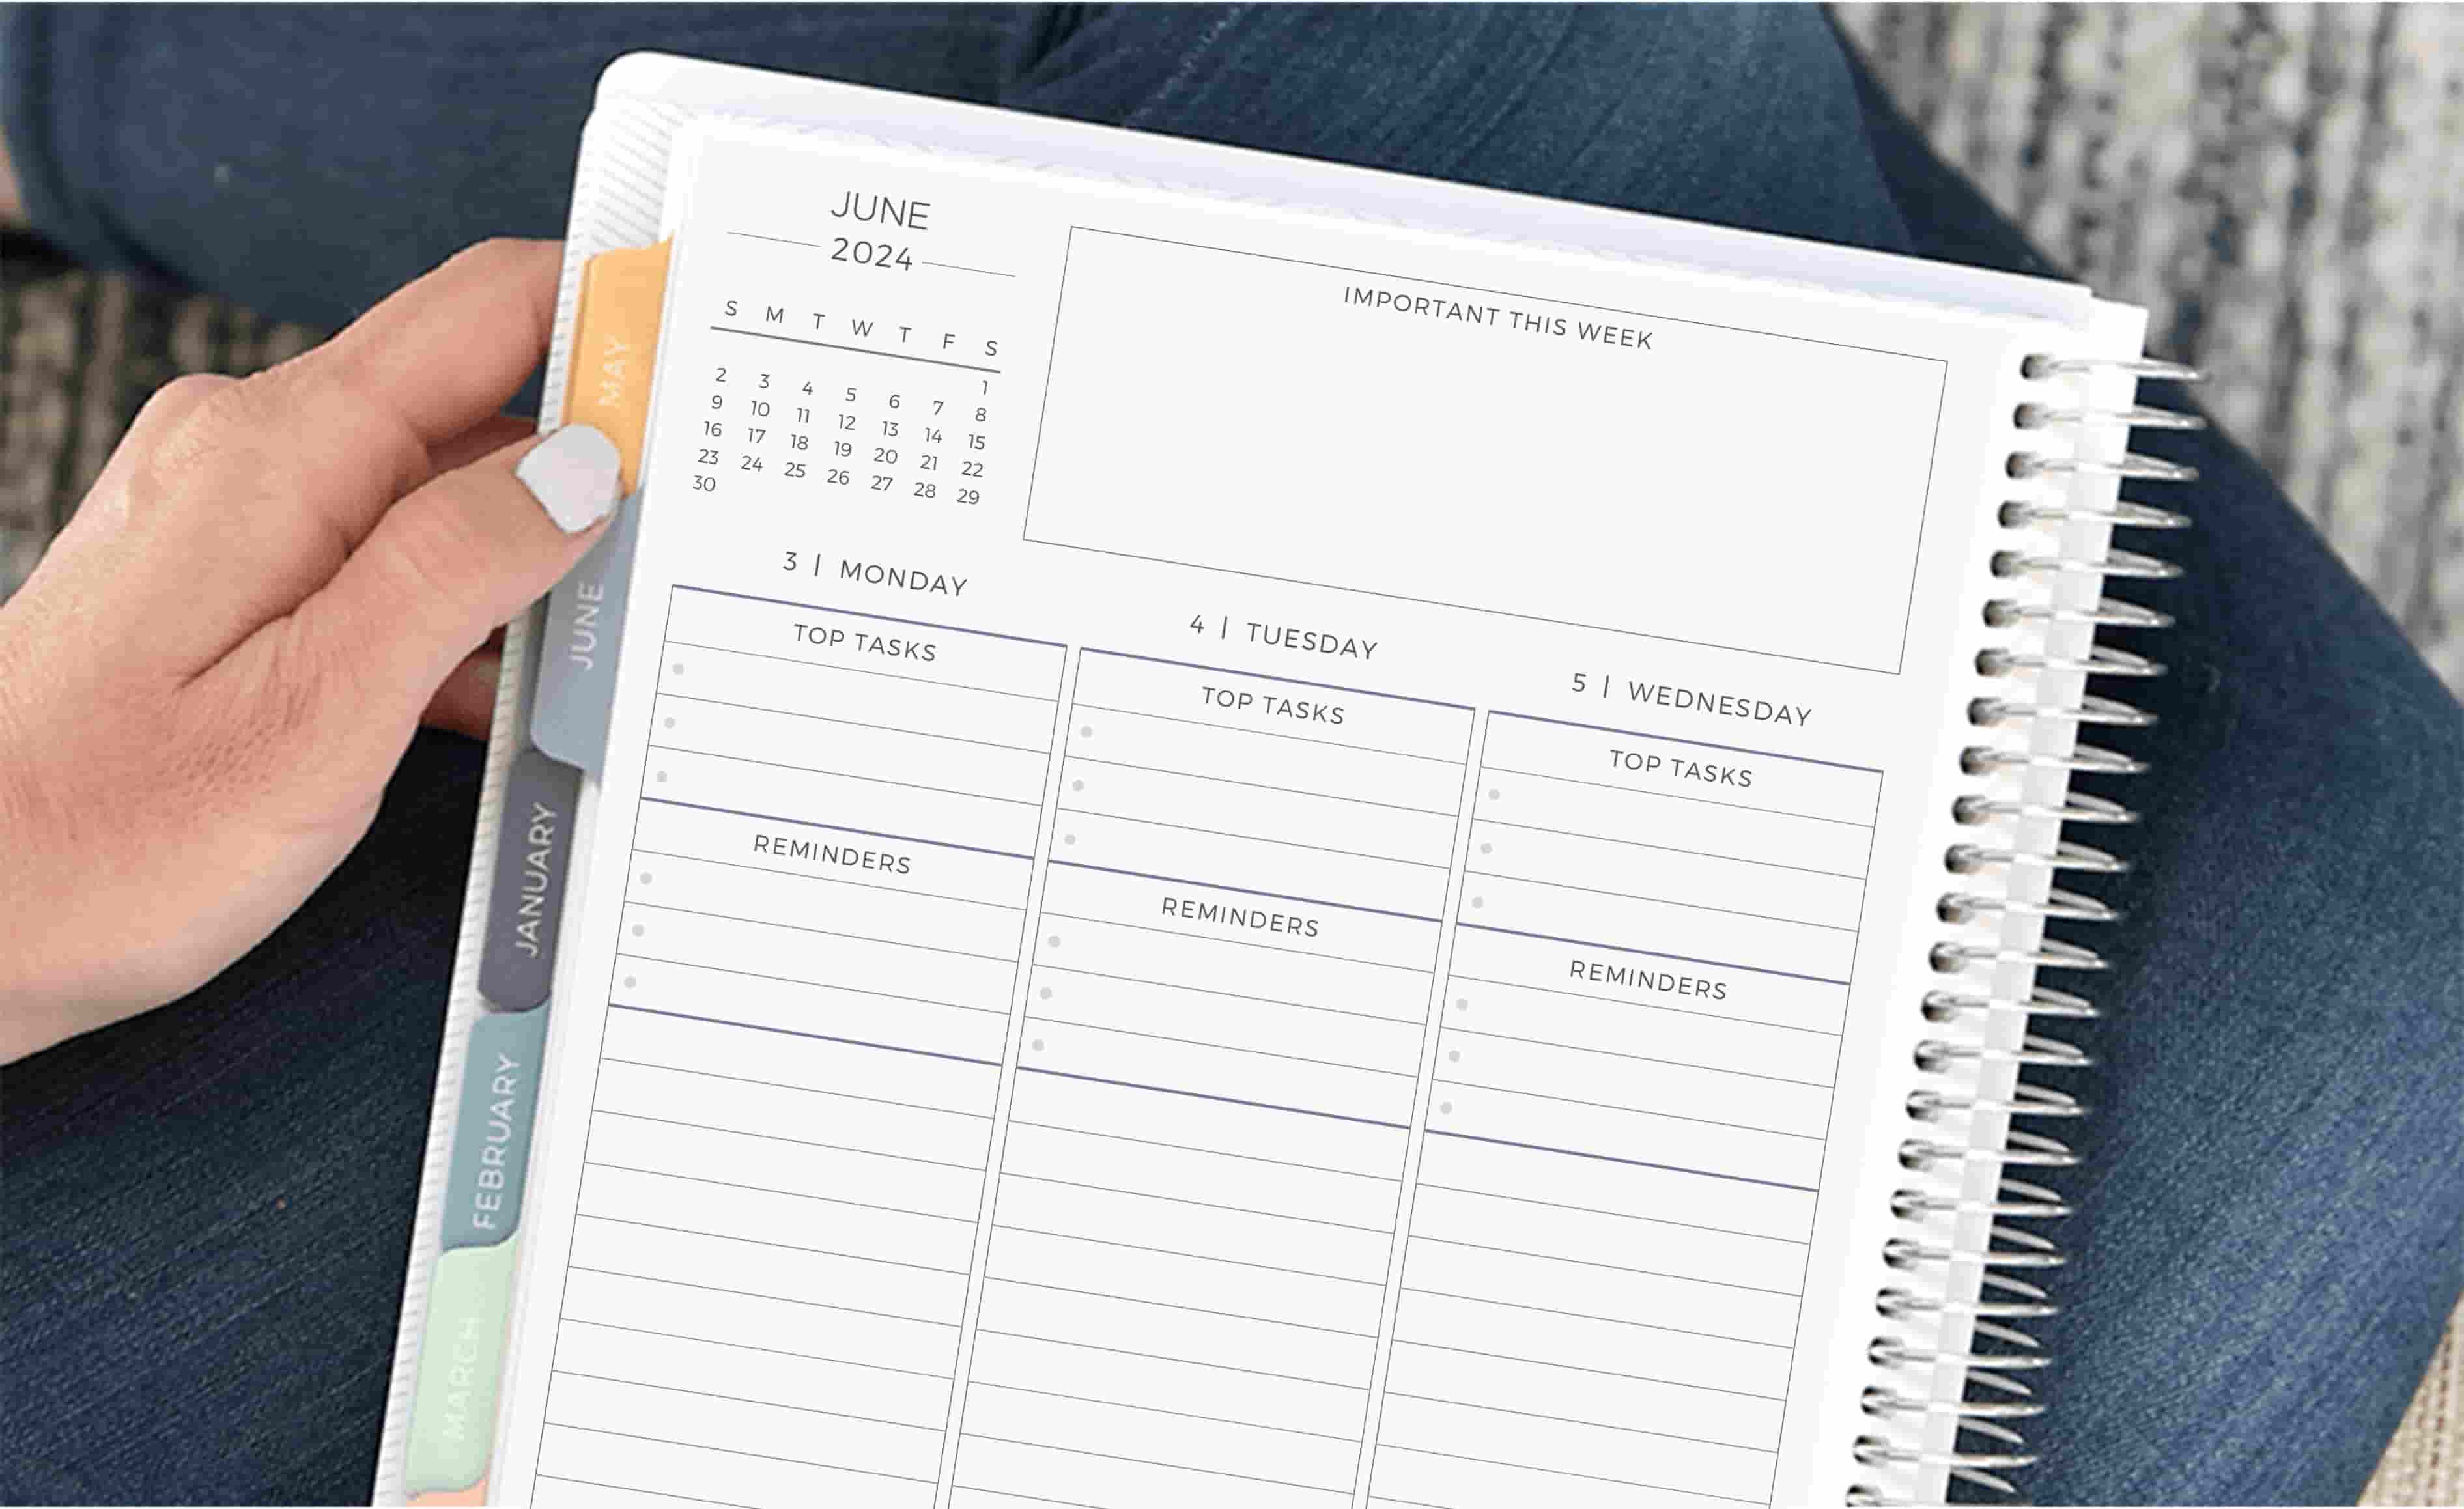 Planner with customizable layout being held on lap